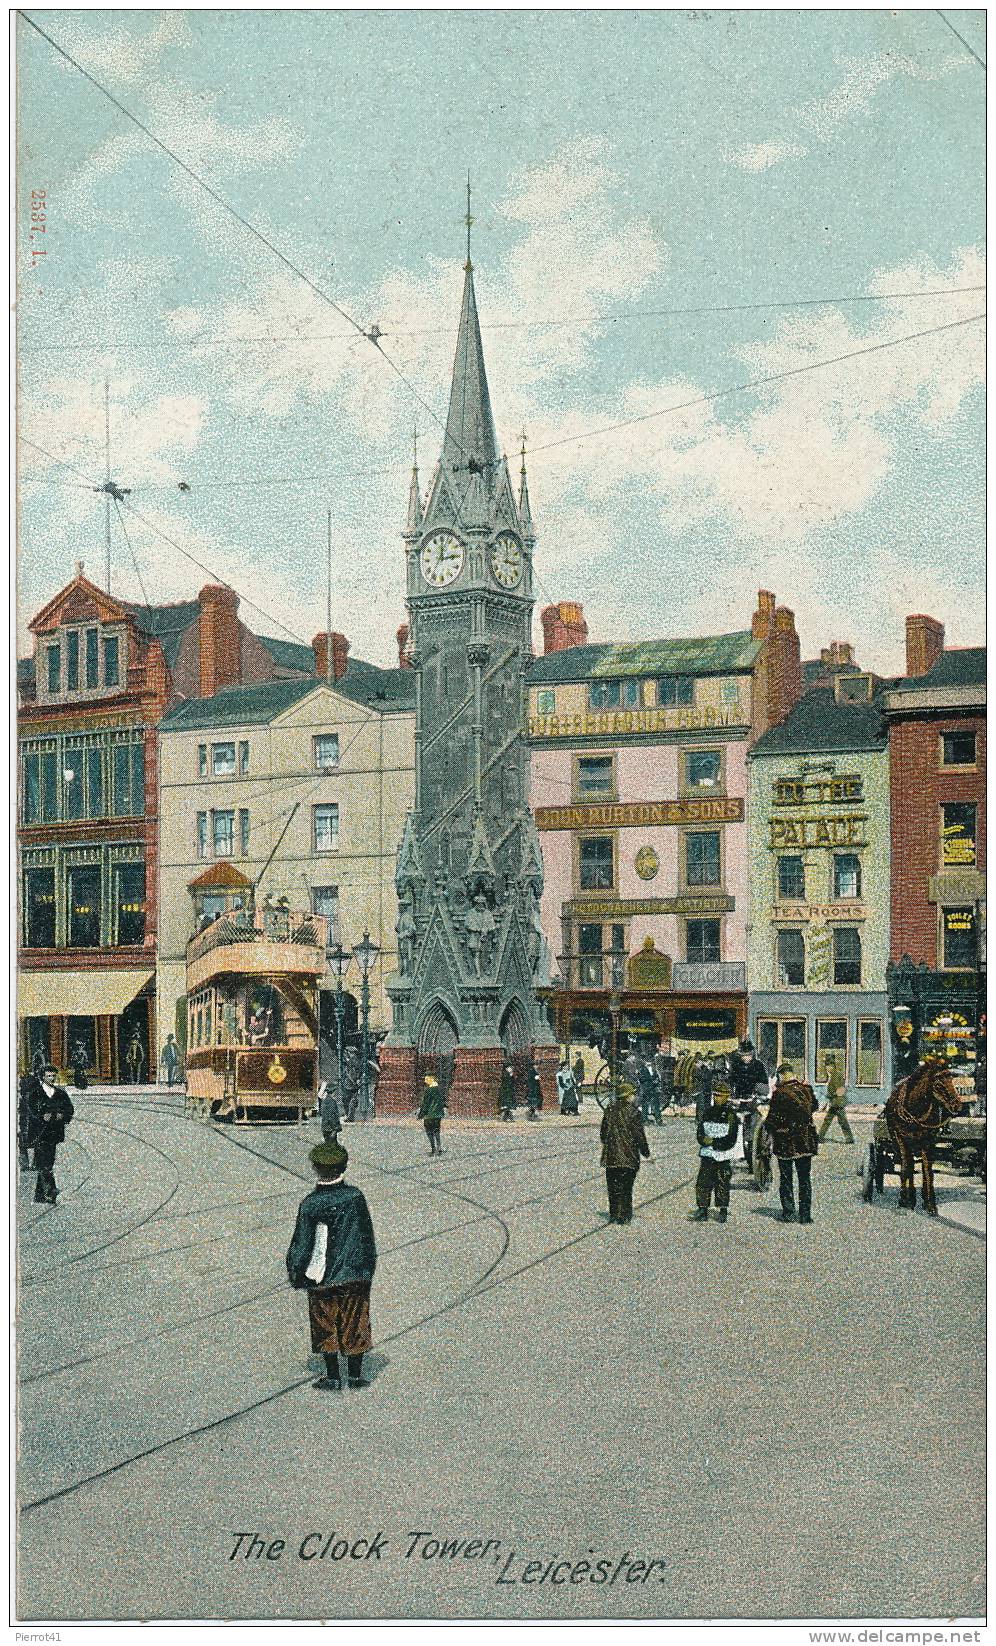 The Clock Tower - Leicester